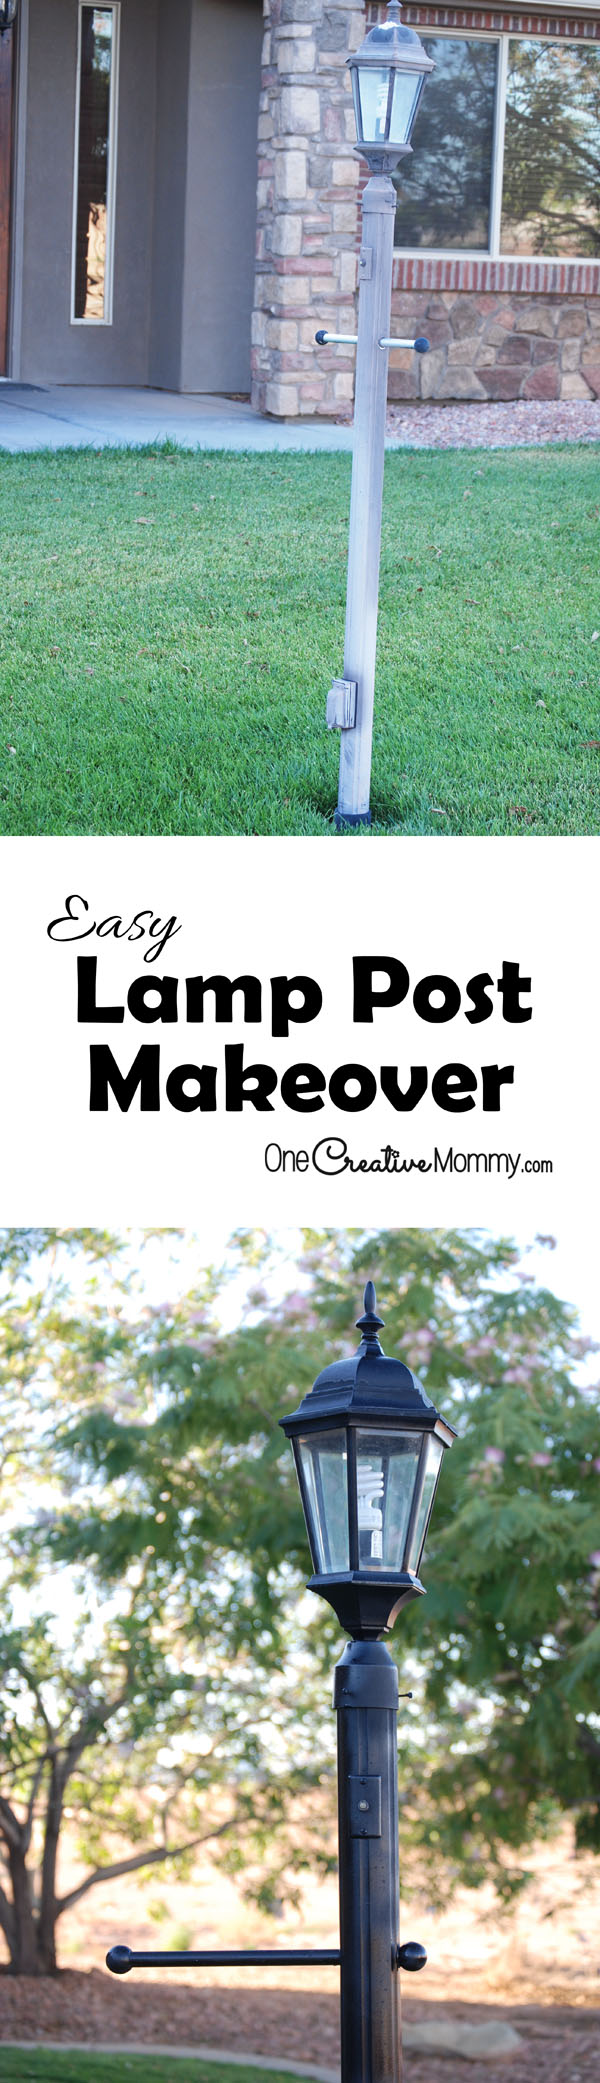 Lamp Post With This Easy Makeover, How To Straighten An Outdoor Lamp Post